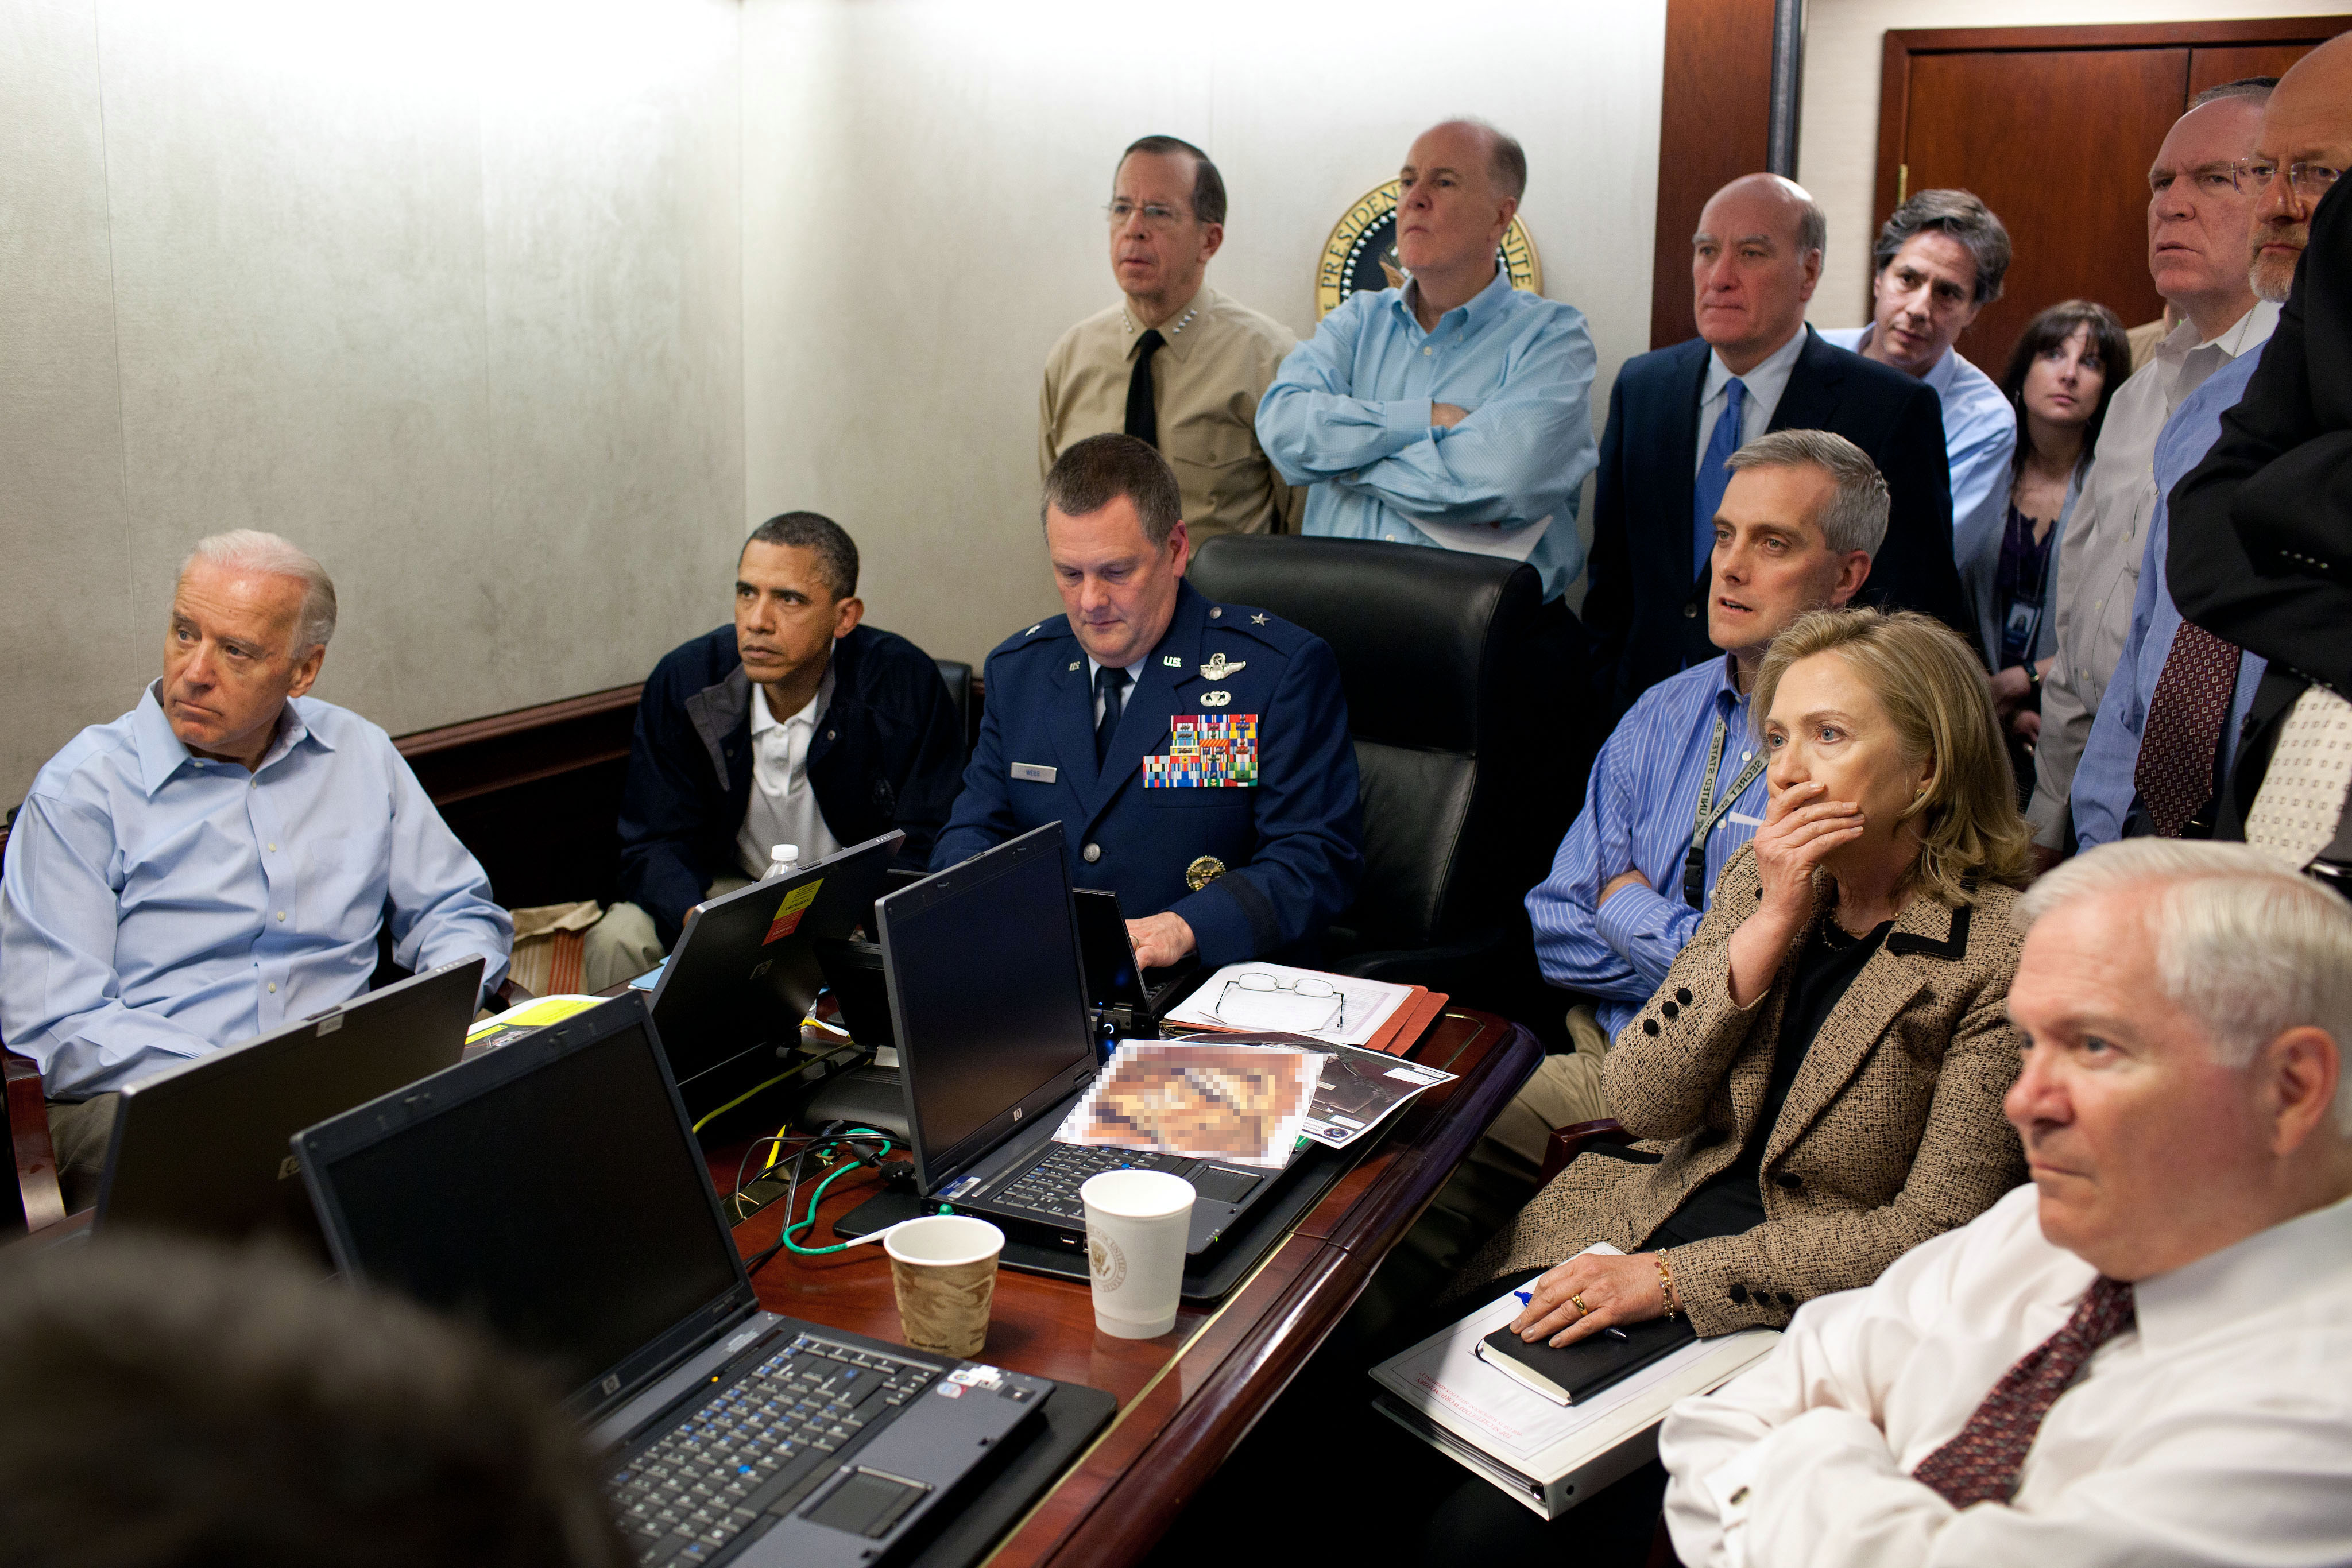 President Barack Obama and Vice President Joe Biden, along with with members of the national security team, receive an update on the mission against Osama bin Laden in the Situation Room of the White House, May 1, 2011. Please note: a classified document seen in this photograph has been obscured.<br /> <h6>(Official White House Photo by Pete Souza) This official White House photograph is being made available only for publication by news organizations and/or for personal use printing by the subject(s) of the photograph. The photograph may not be manipulated in any way and may not be used in commercial or political materials, advertisements, emails, products, promotions that in any way suggests approval or endorsement of the President, the First Family, or the White House.